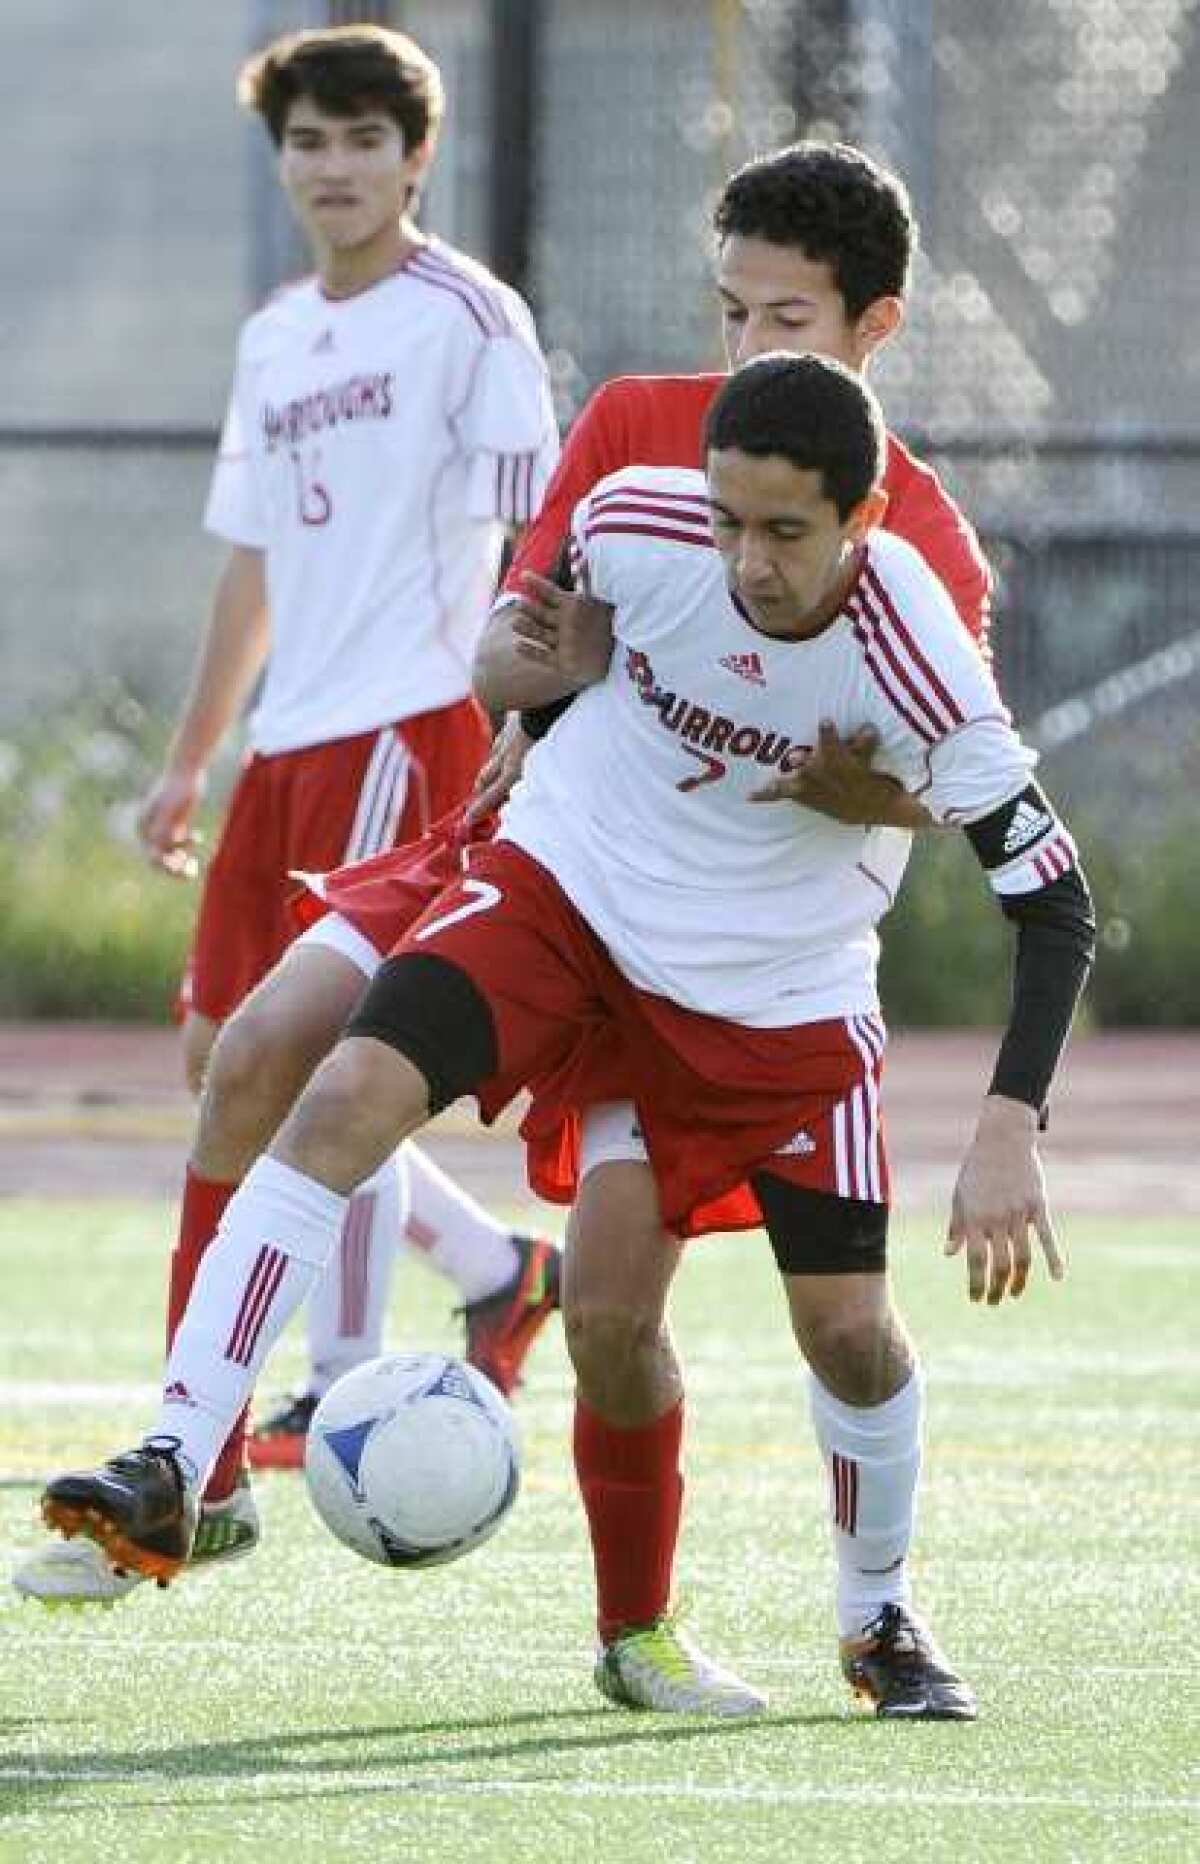 Burroughs' Brian Arzate, with Pasadena defender Gerardo Espinoza reaching through him, controls the ball in the first half in a Pacific League boys soccer match at Burroughs High School in Burbank on Monday, January 28, 2013. Pasadena won the match 3-1.